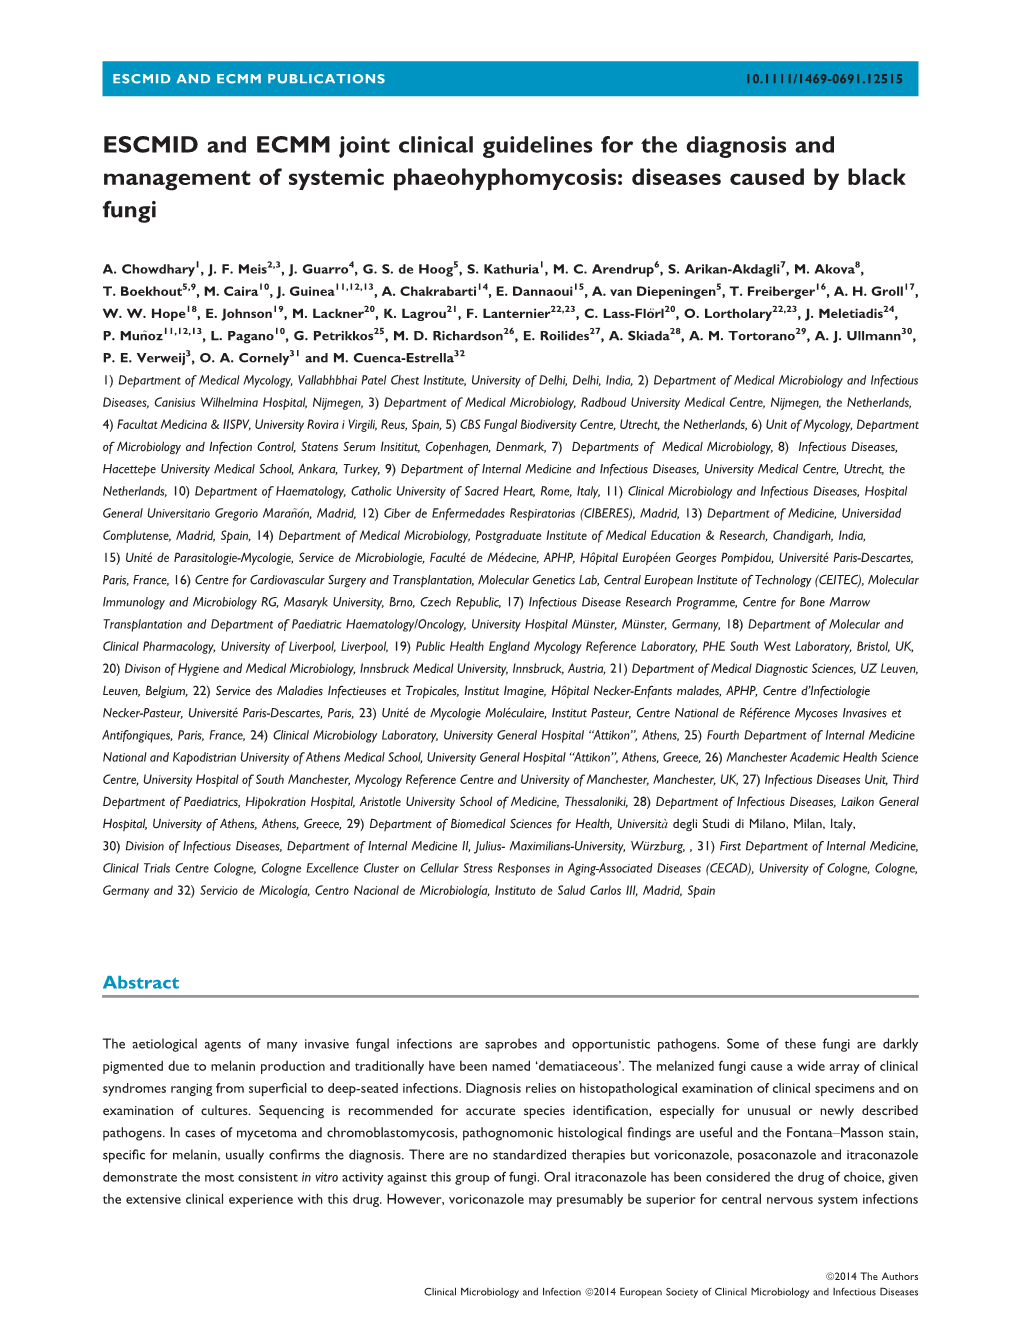 ESCMID and ECMM Joint Clinical Guidelines for the Diagnosis and Management of Systemic Phaeohyphomycosis: Diseases Caused by Black Fungi